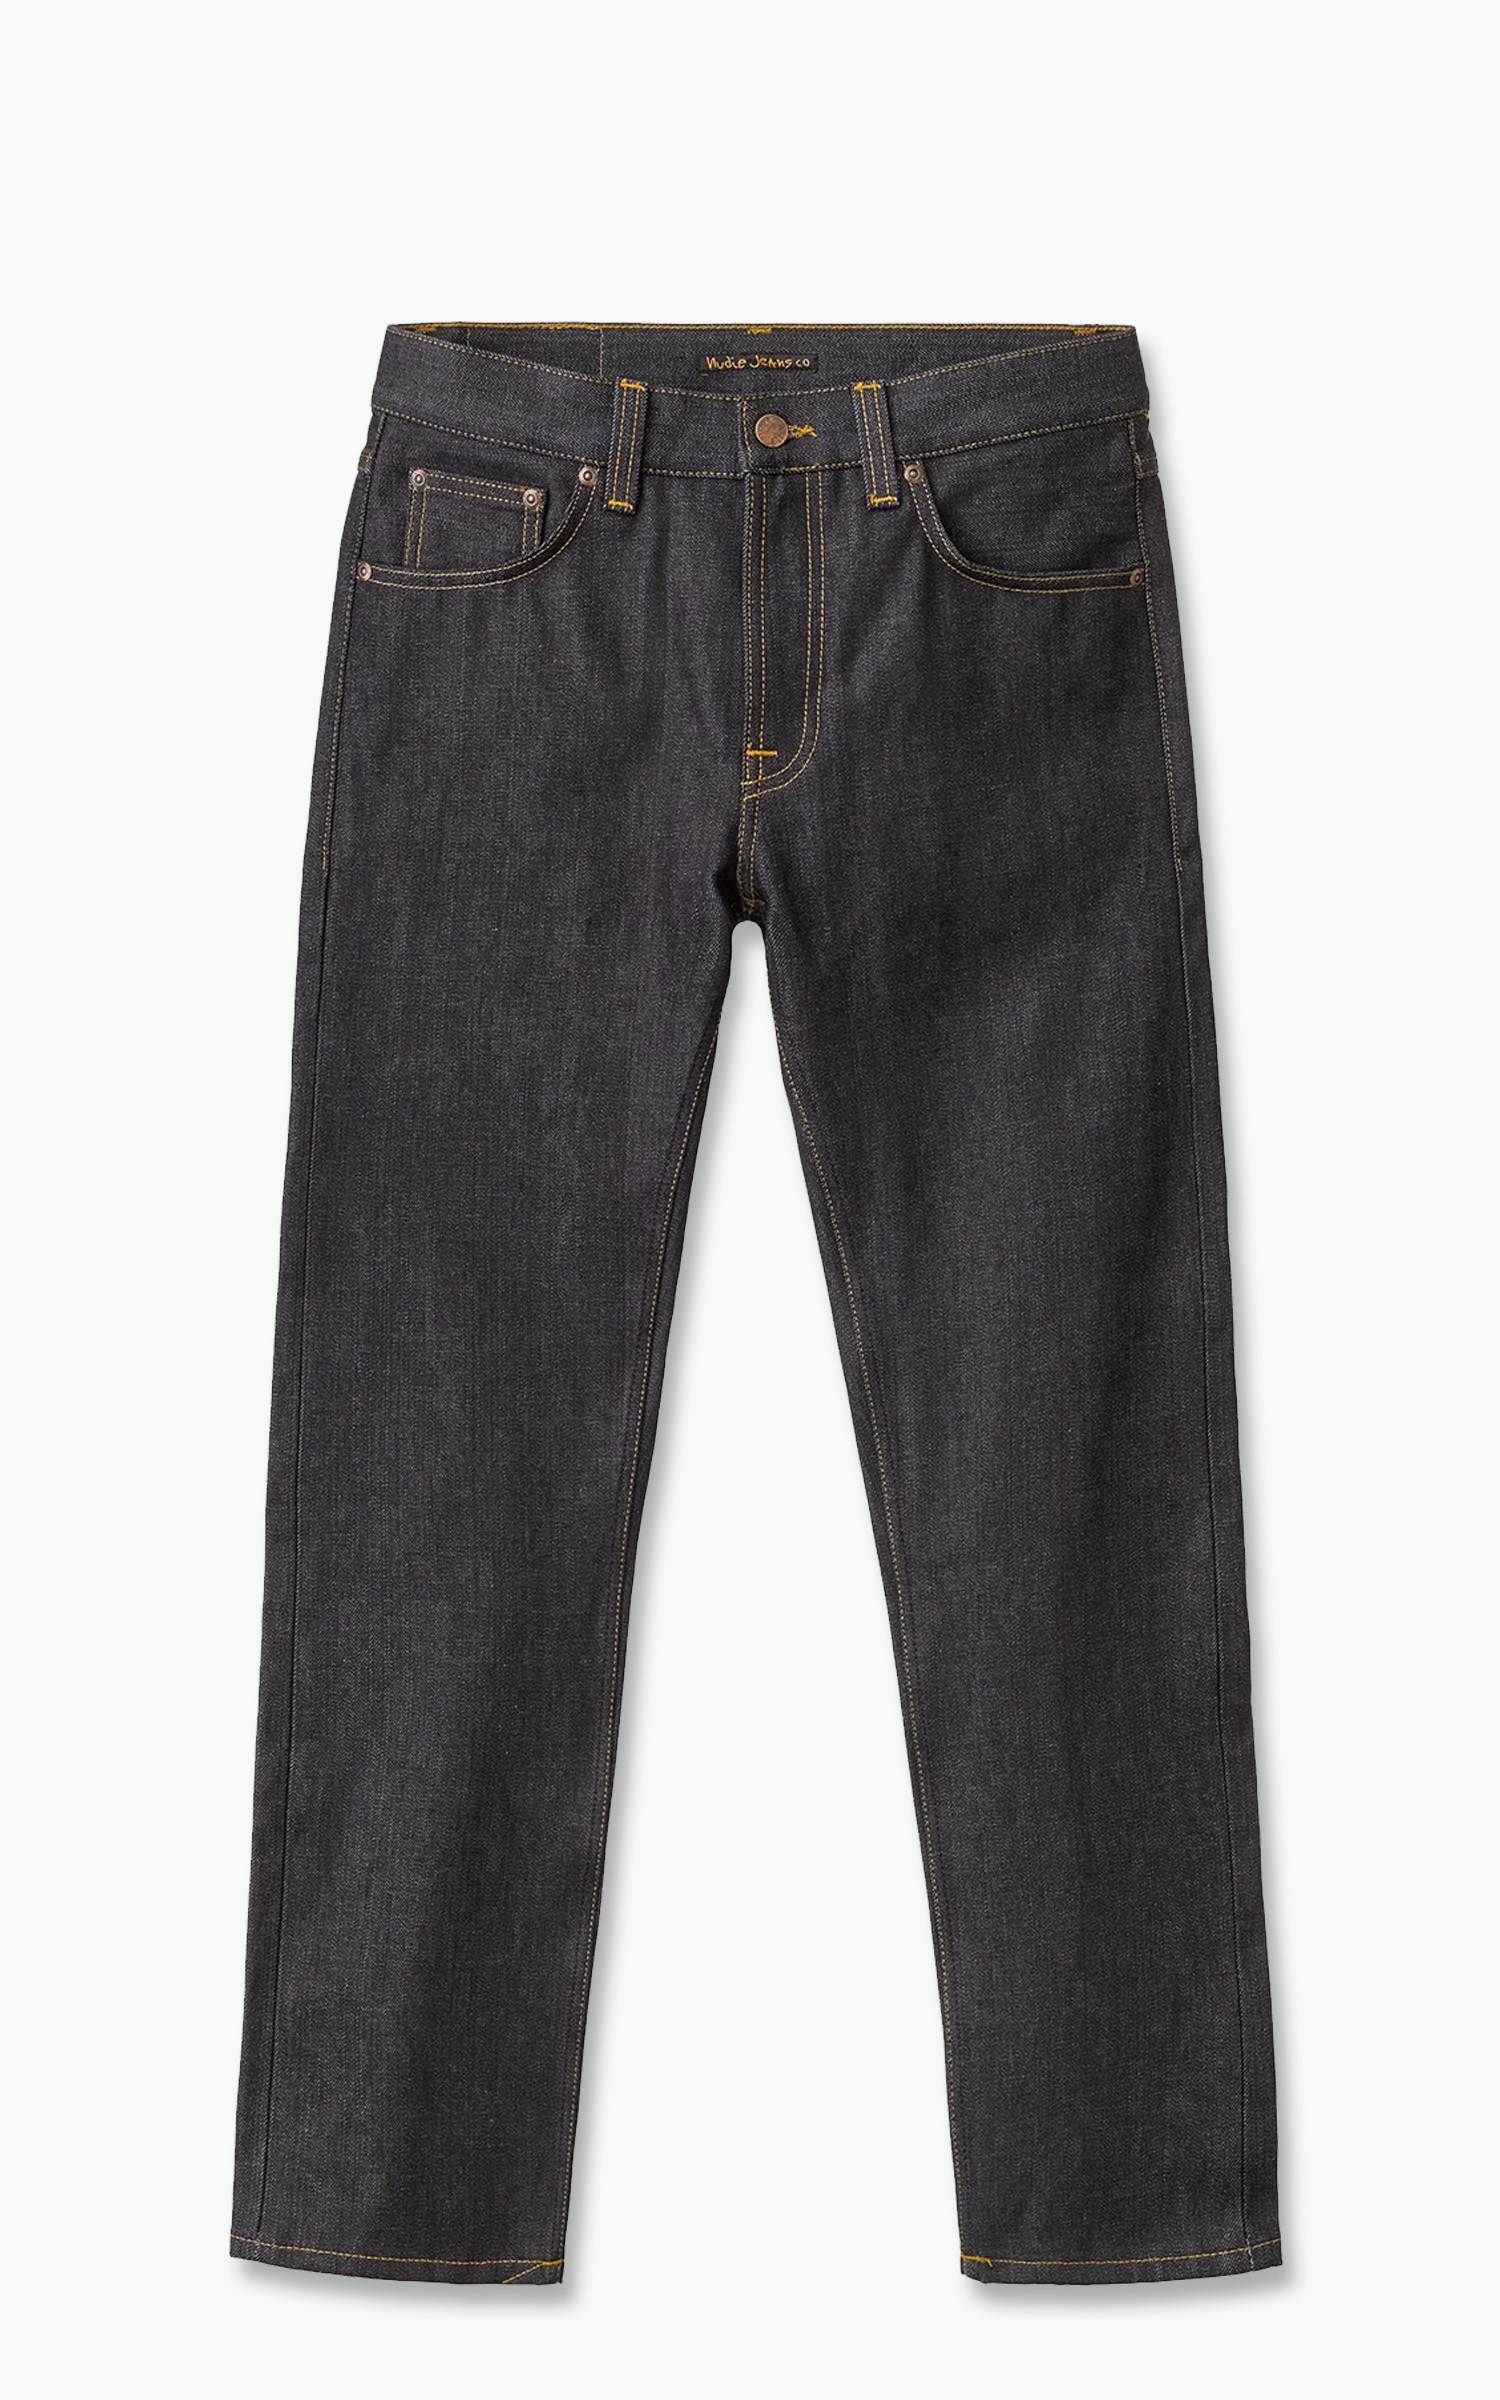 Nudie Jeans Gritty Jackson Dry Classic Navy | Cultizm